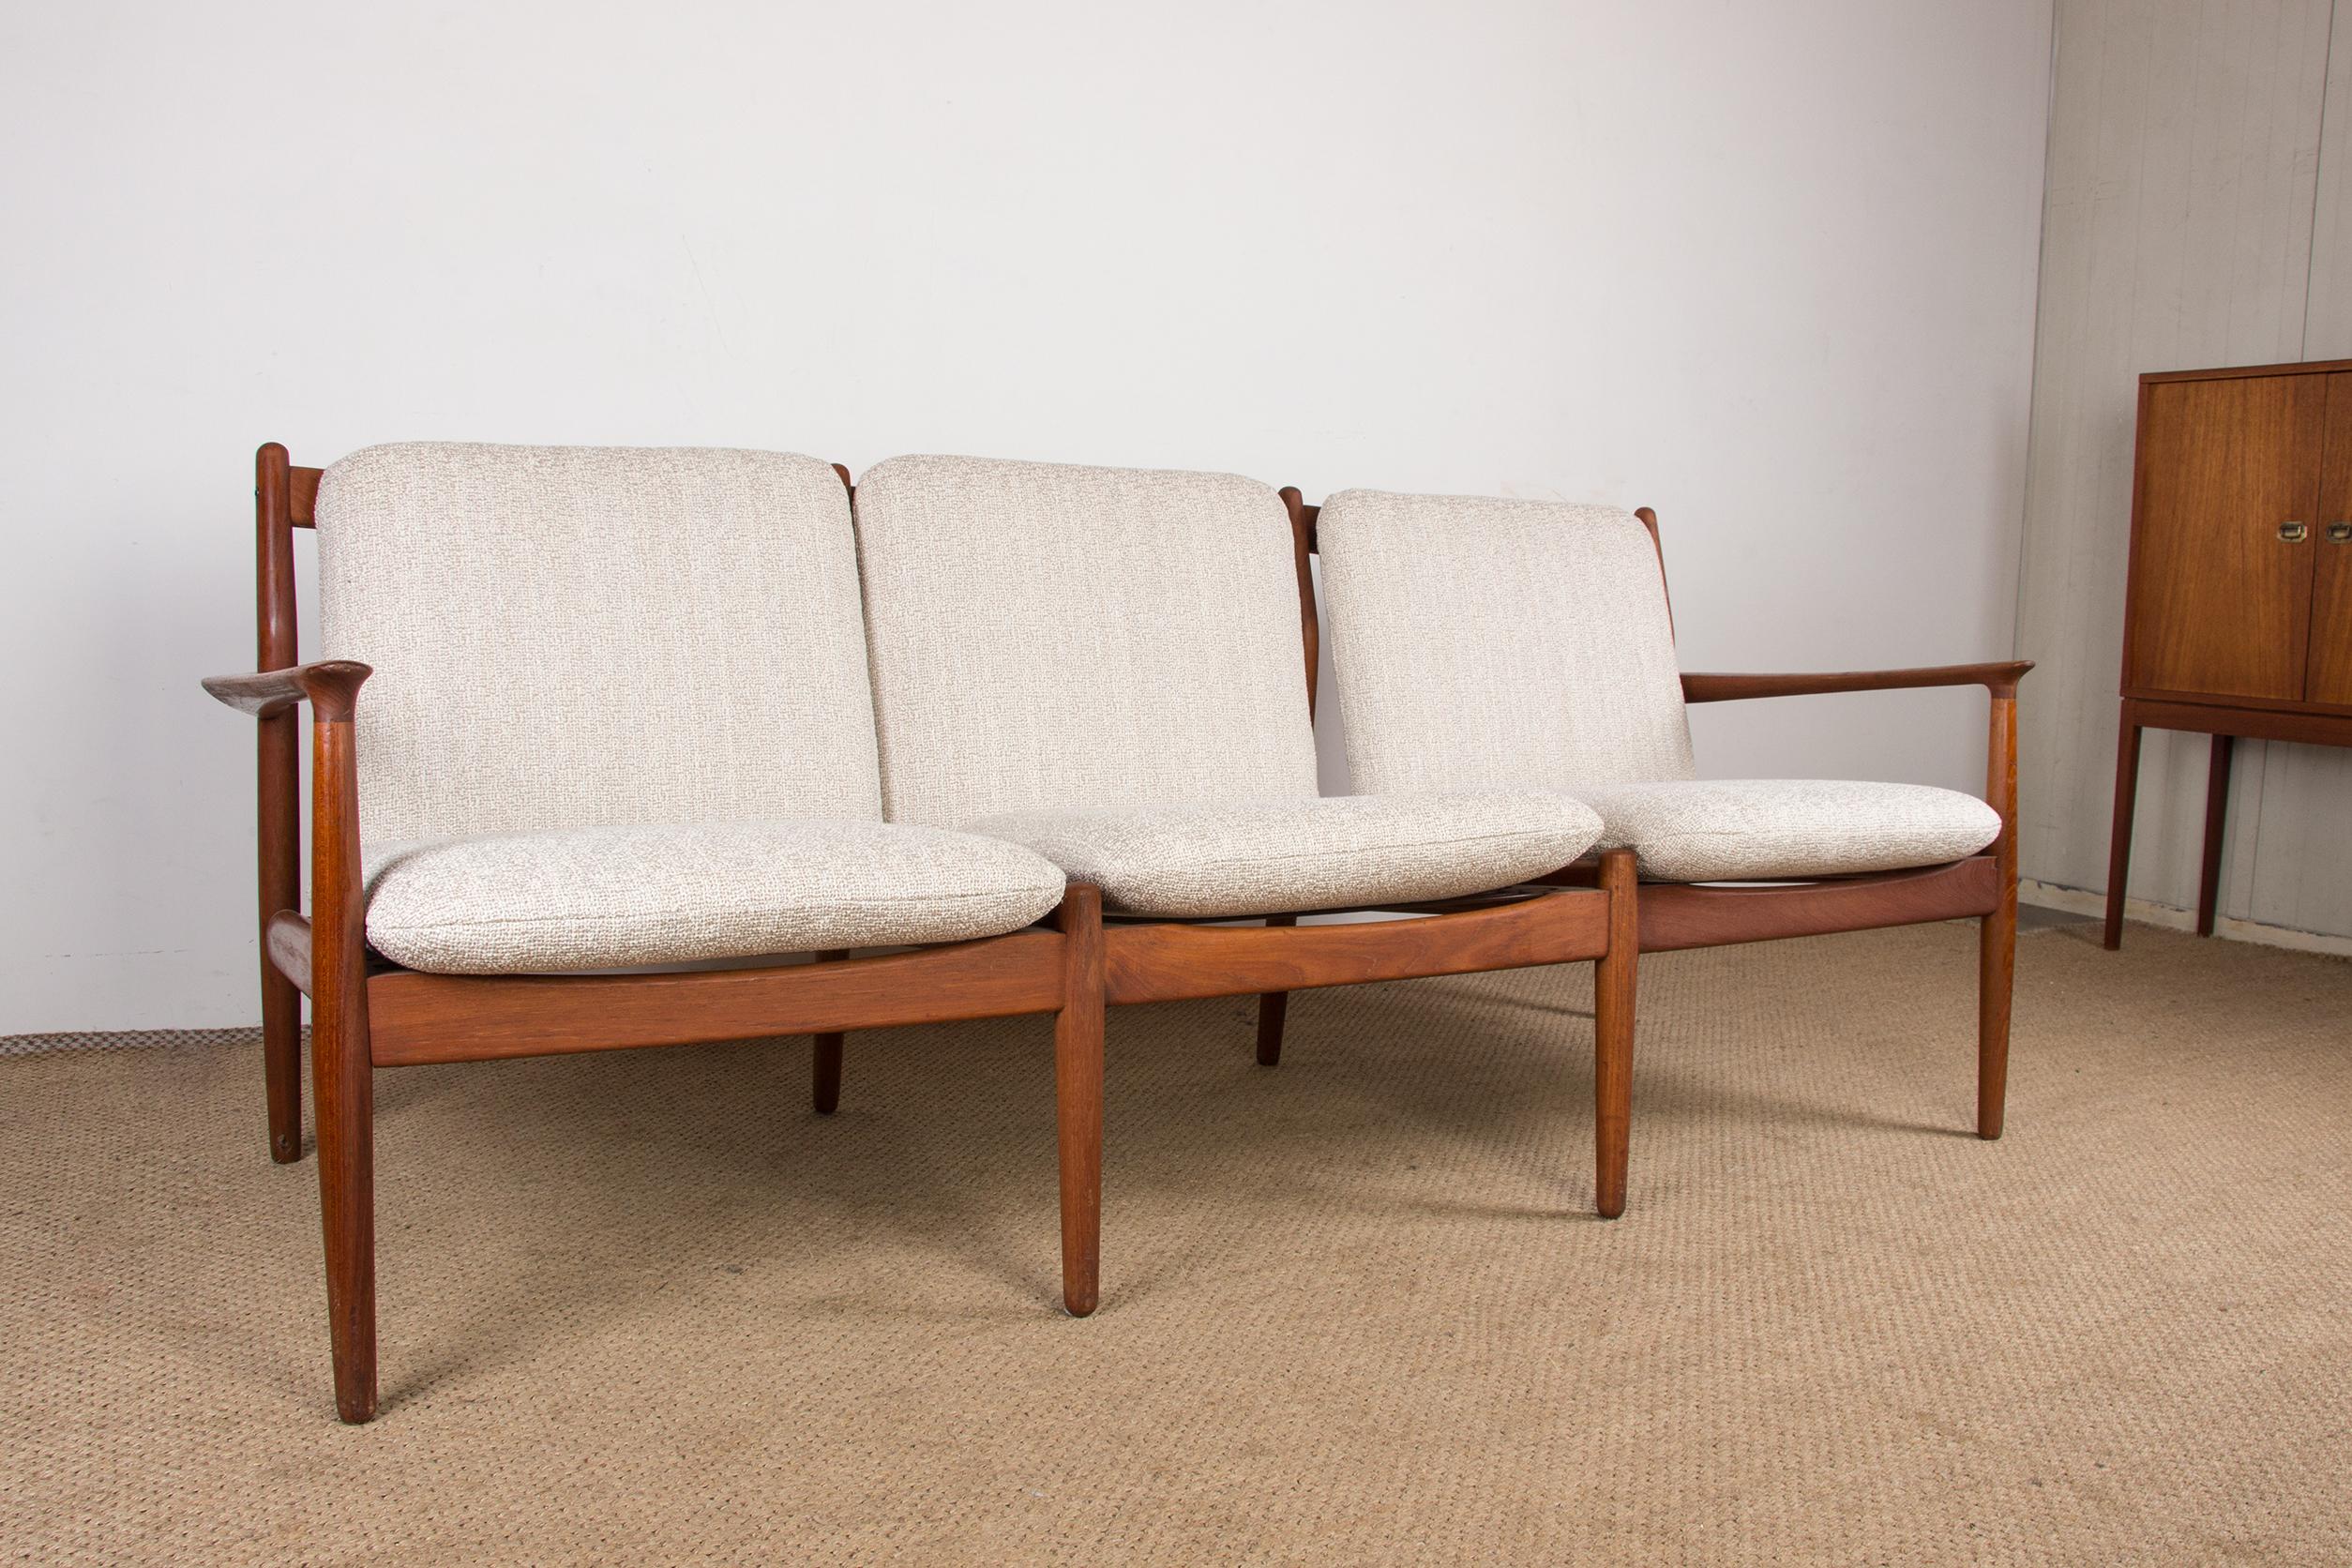 Superb Scandinavian sofa. Manufacture of very good quality, seats and backrests redone in cream terry cloth, Very elegant design, great comfort. Two armchairs from the same set can be found on another listing.